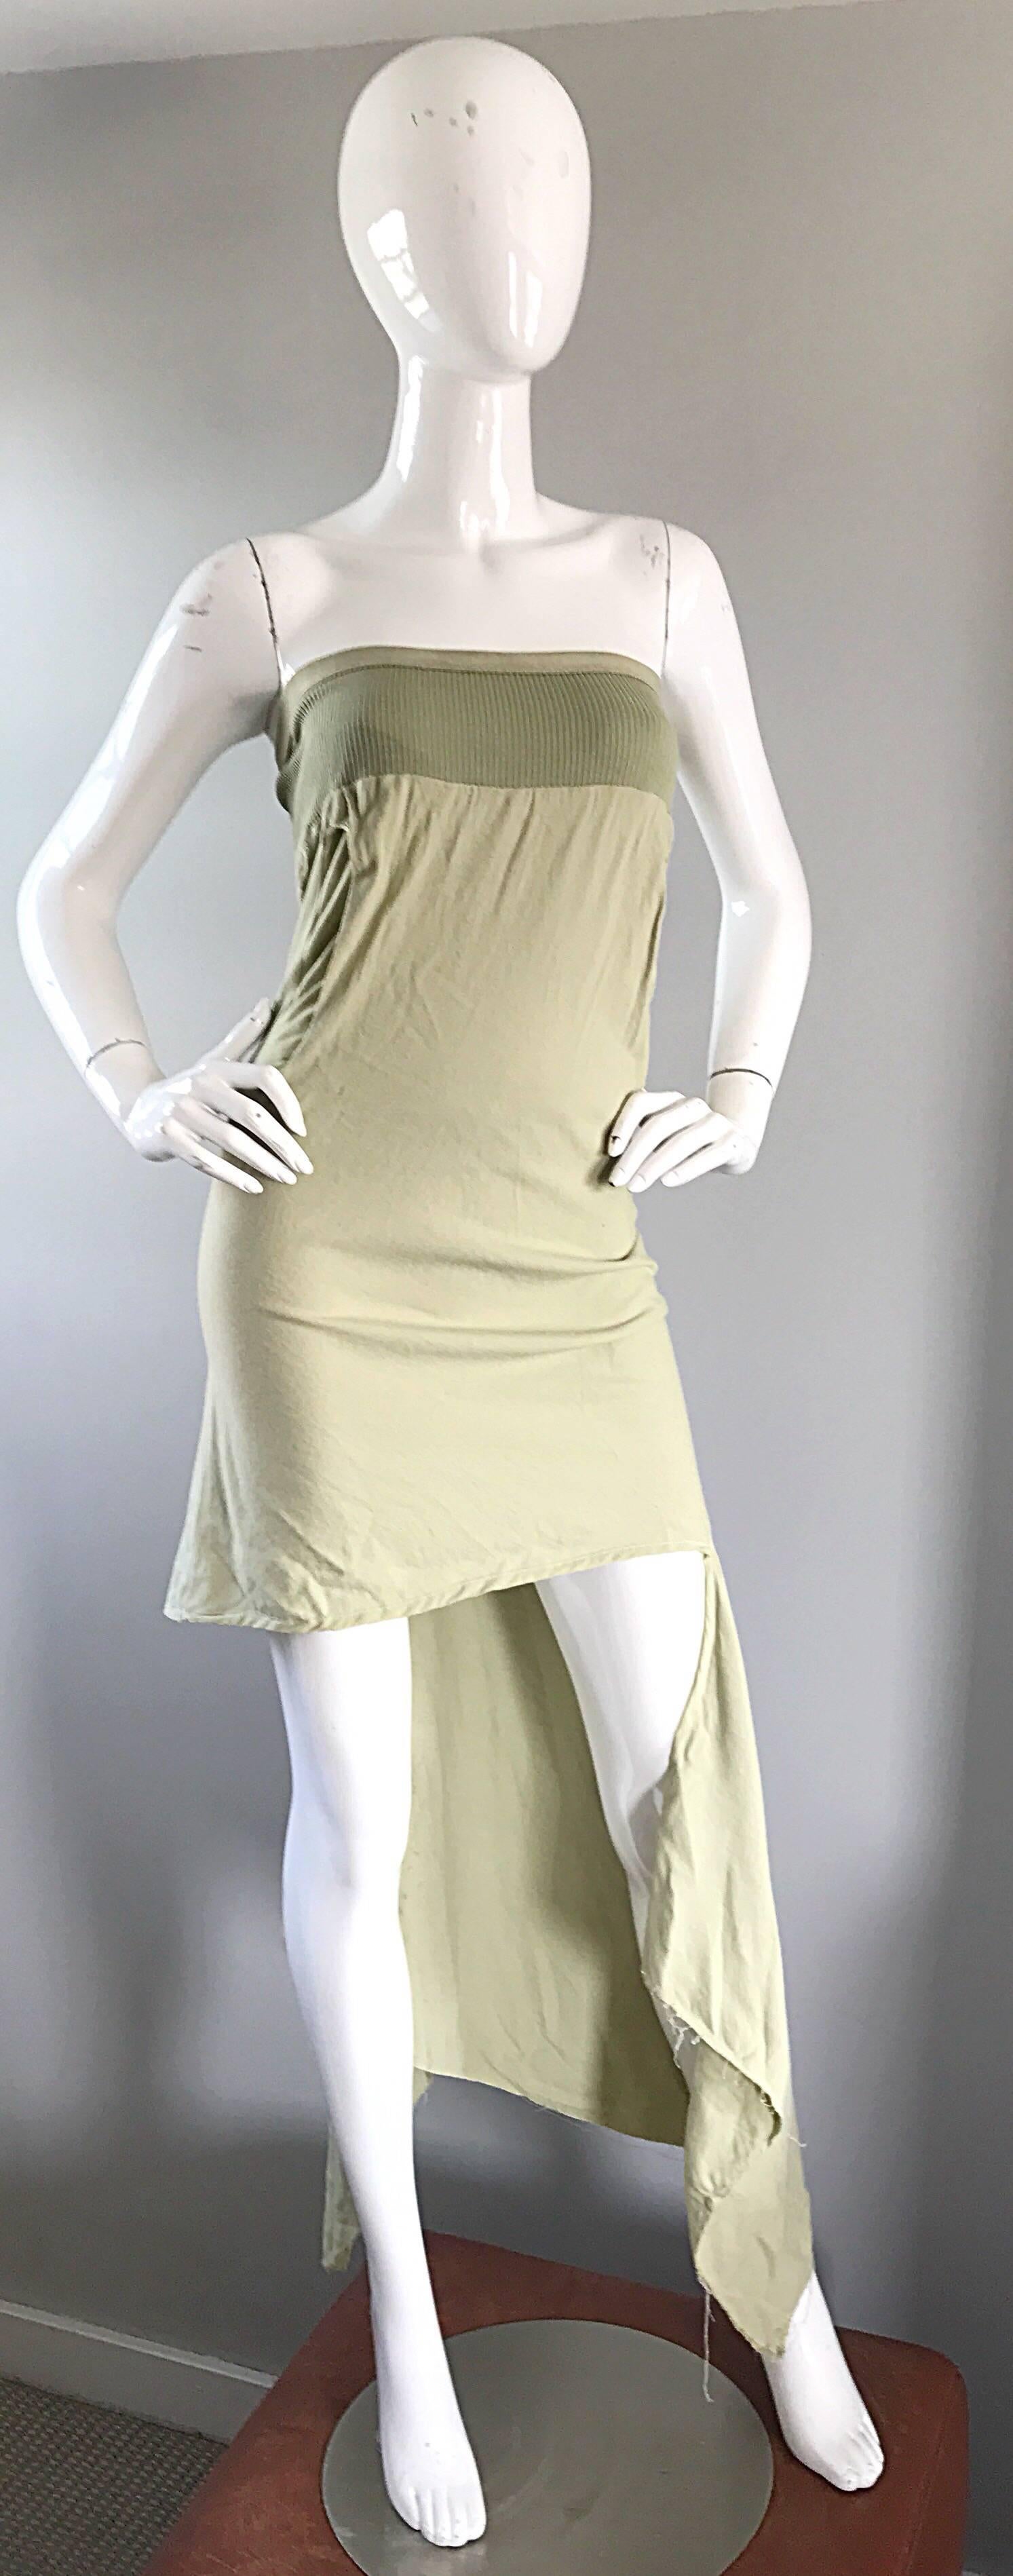 New Rick Owens ' Queen ' F/W '04 Strapless Light Green Asymmetrical Dress In New Condition For Sale In San Diego, CA